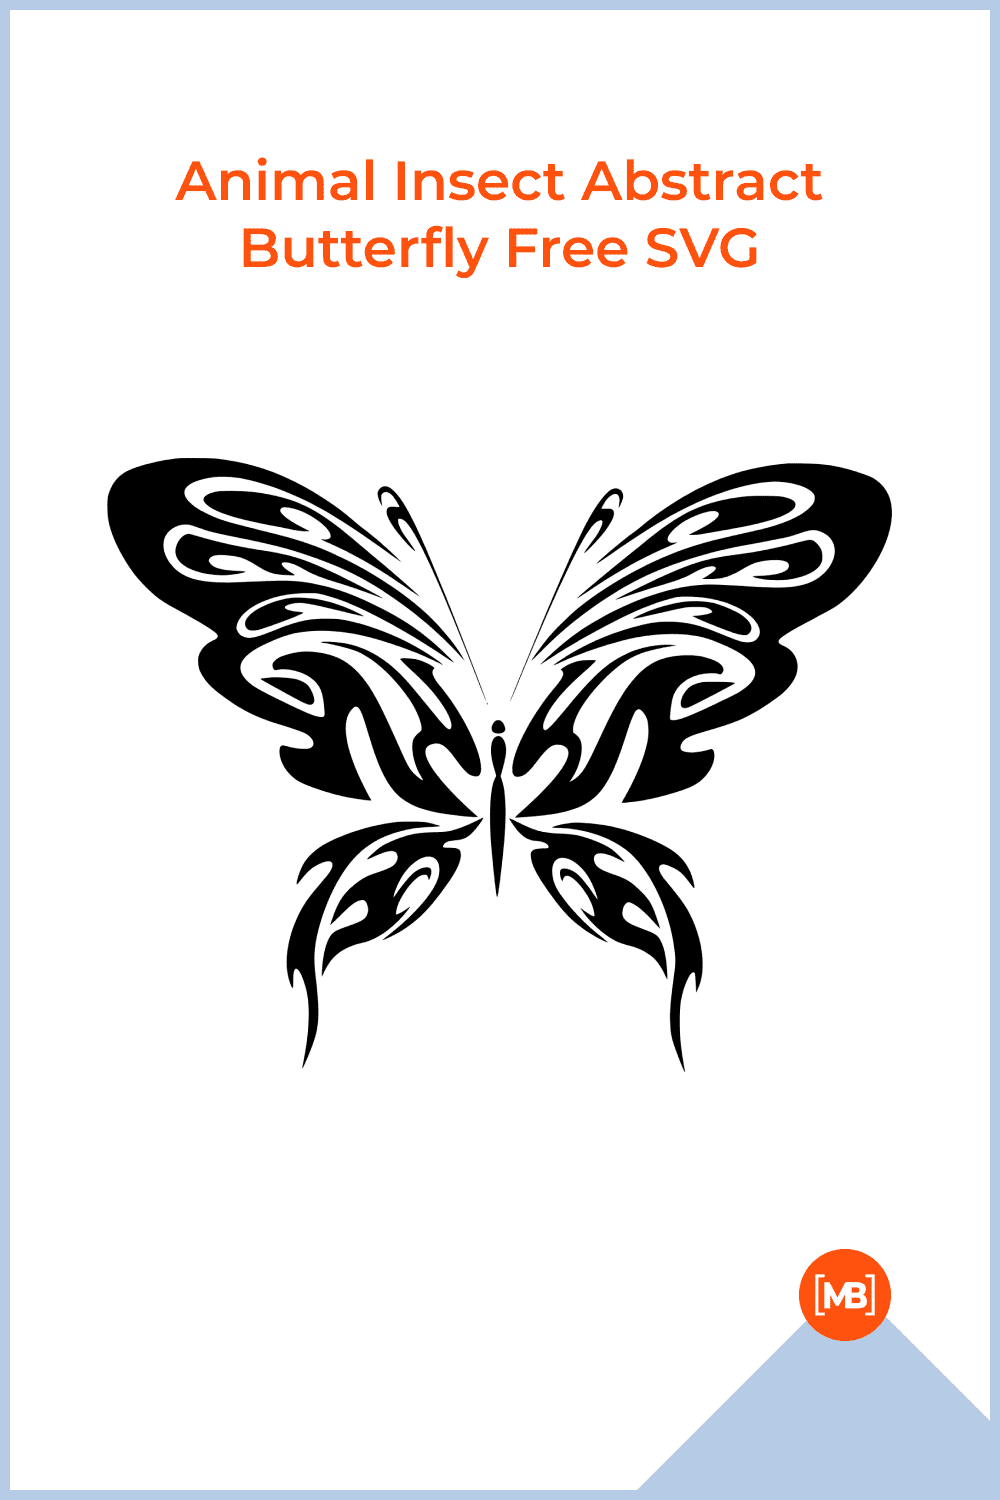 Animal Insect Abstract Butterfly Free SVG.